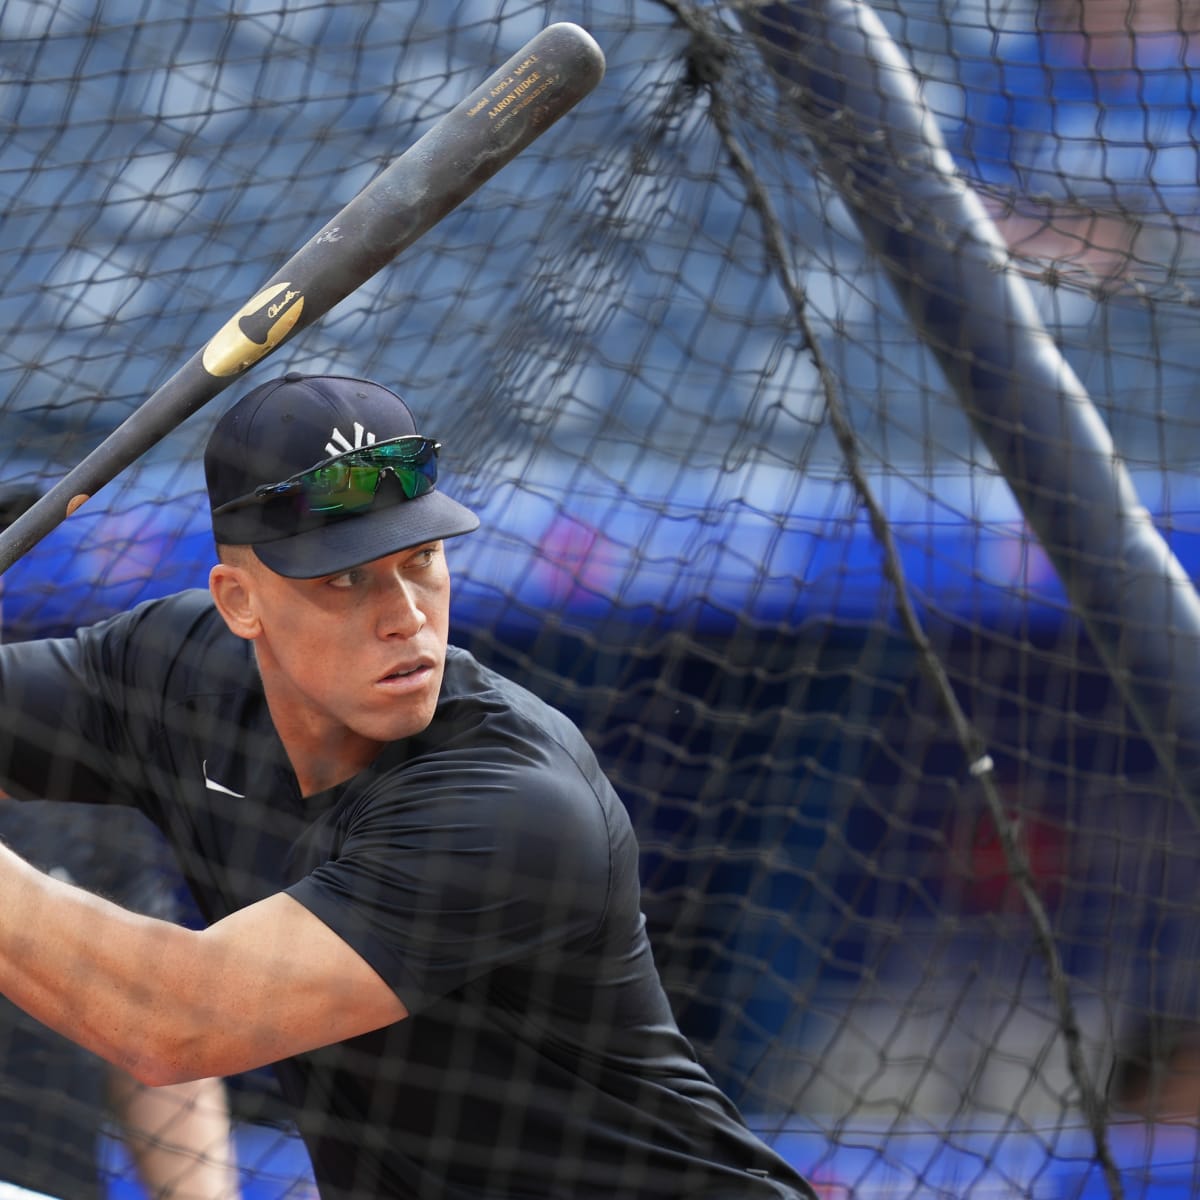 Yankees' Aaron Judge backup plan will make Red Sox fans furious